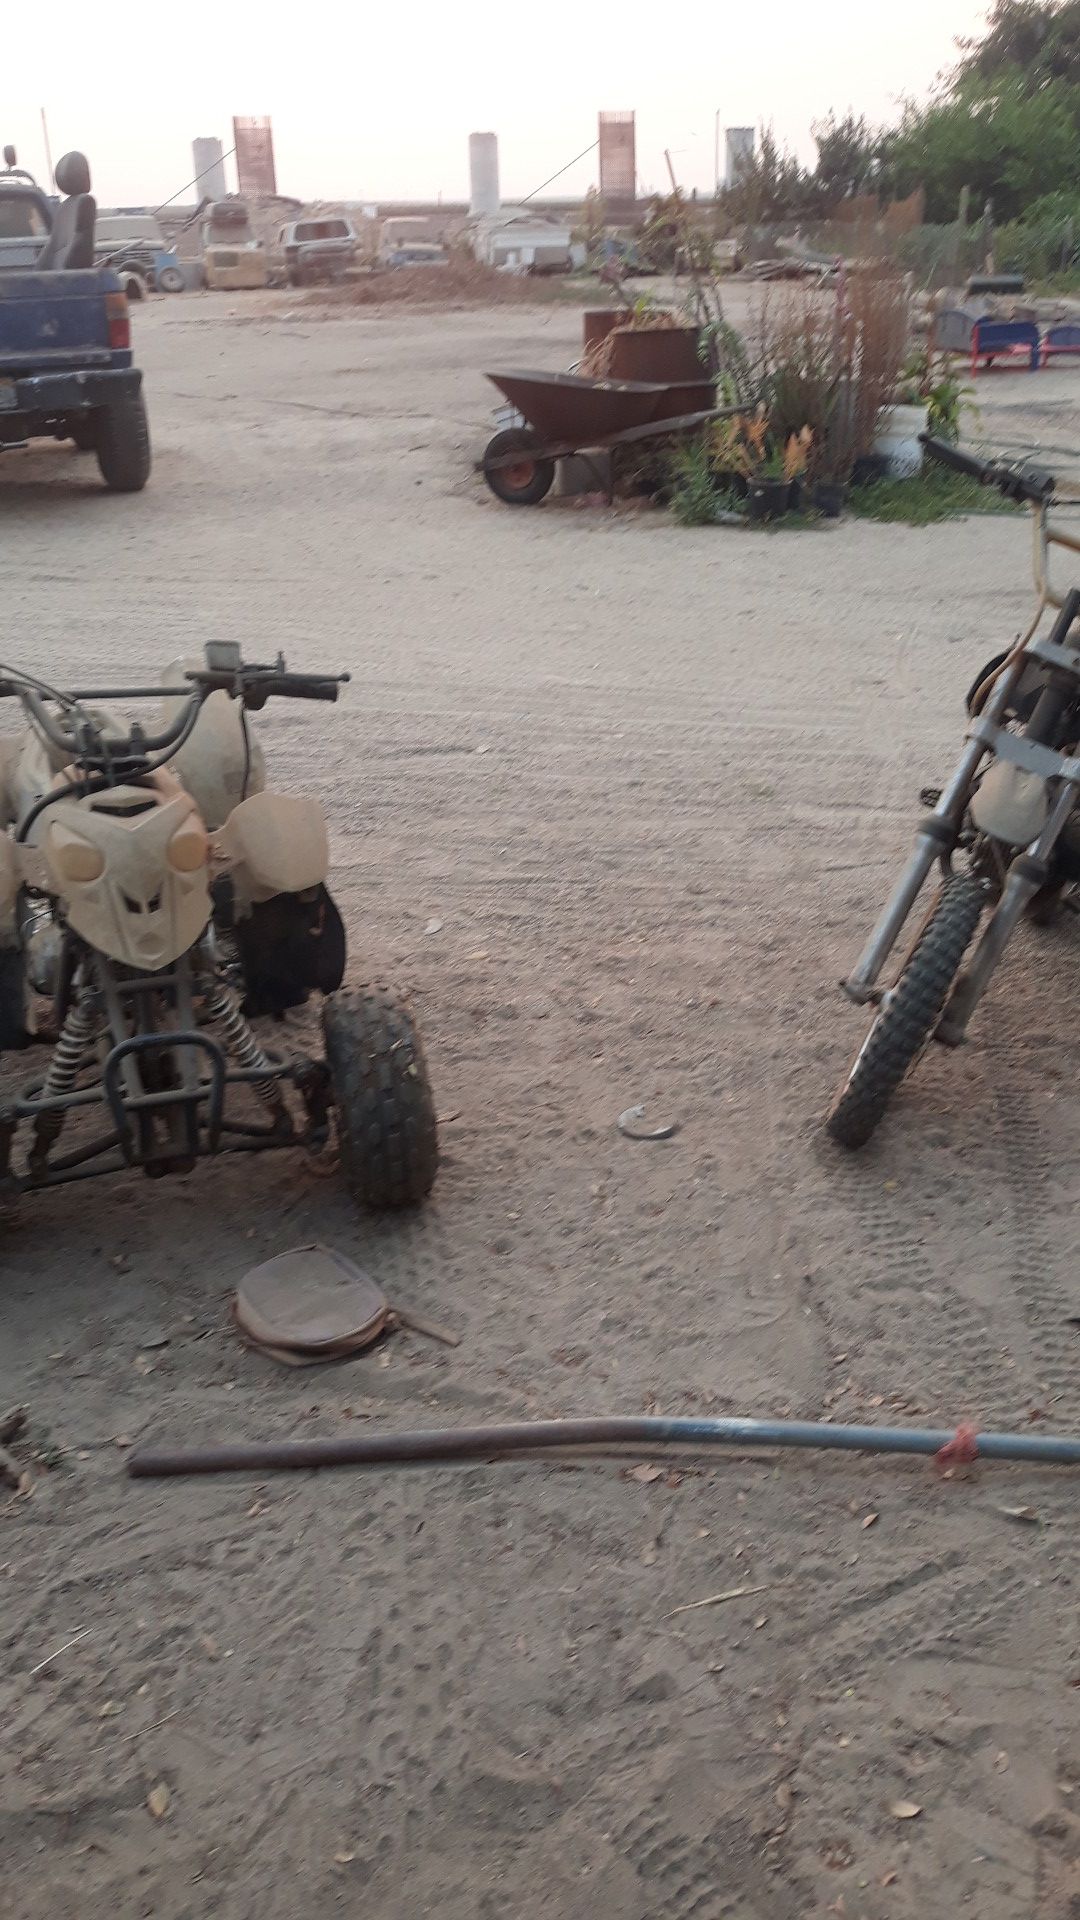 I have to quad any dirt bike for sale I think there are China